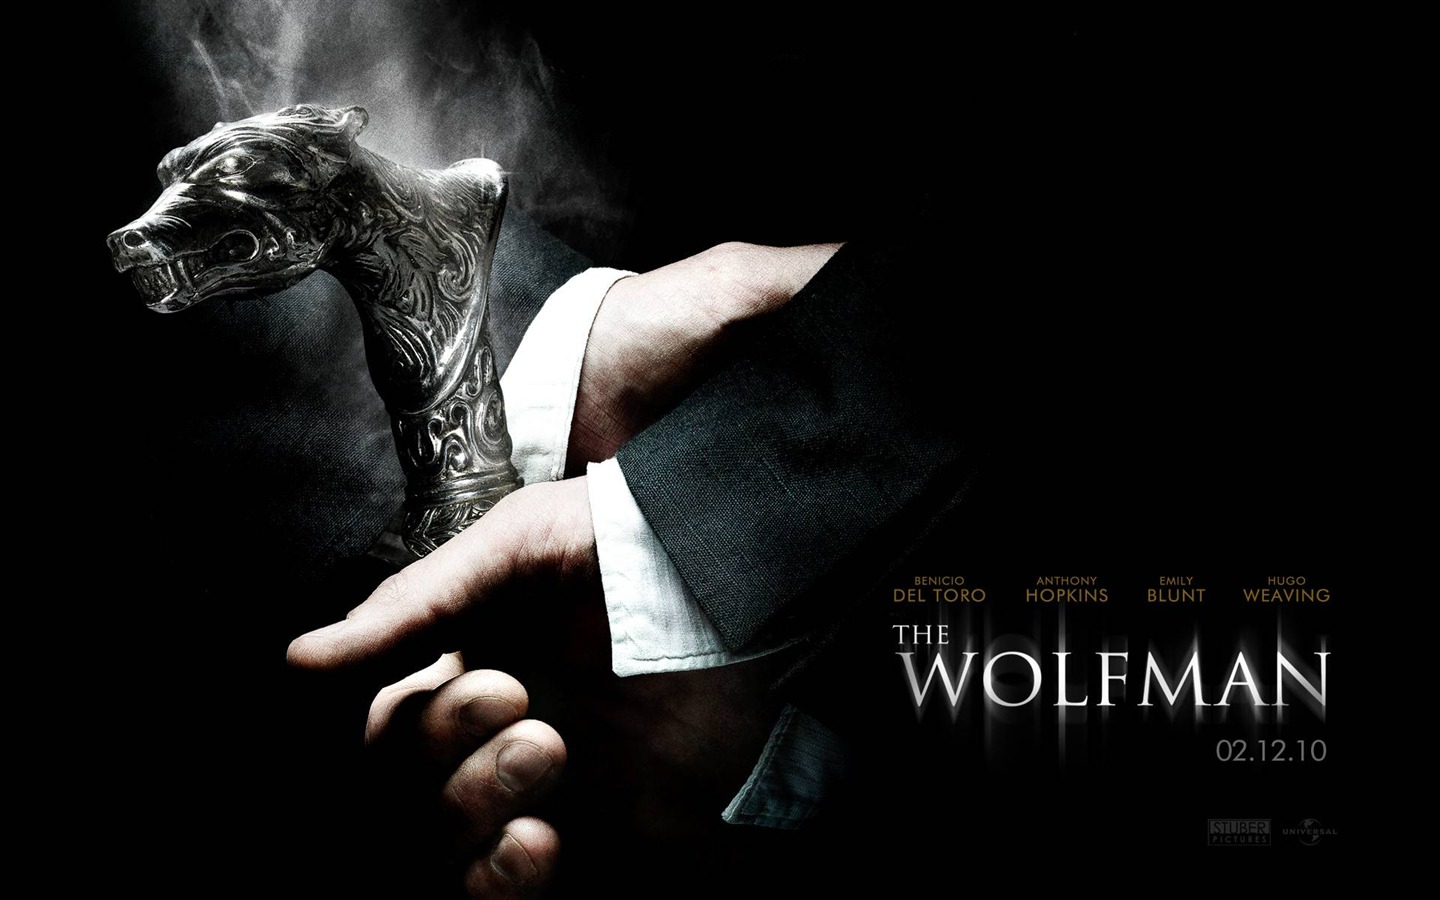 The Wolfman Movie Wallpapers #7 - 1440x900